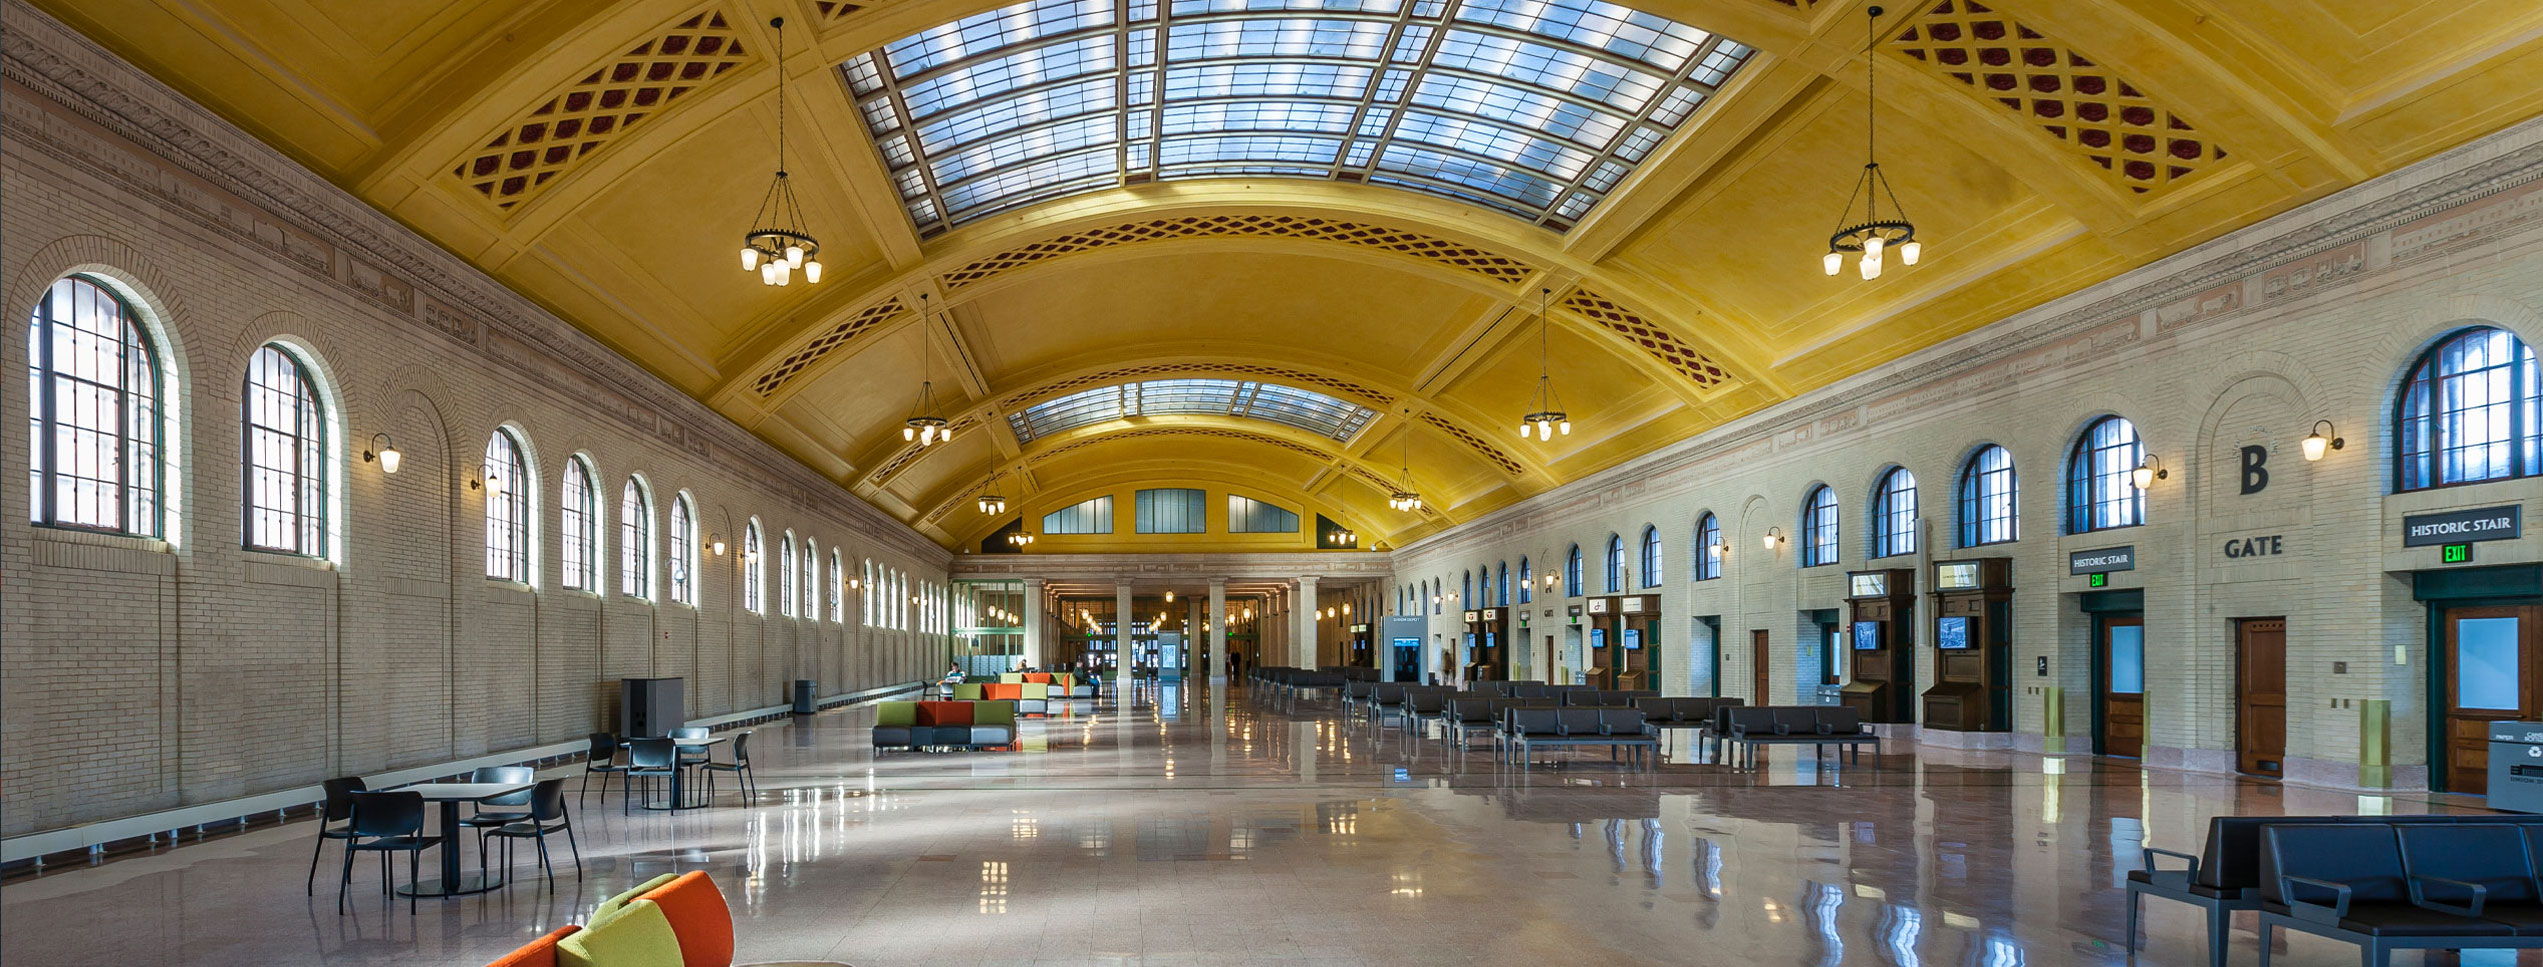 Inside of large depot with marble floors and large skylights